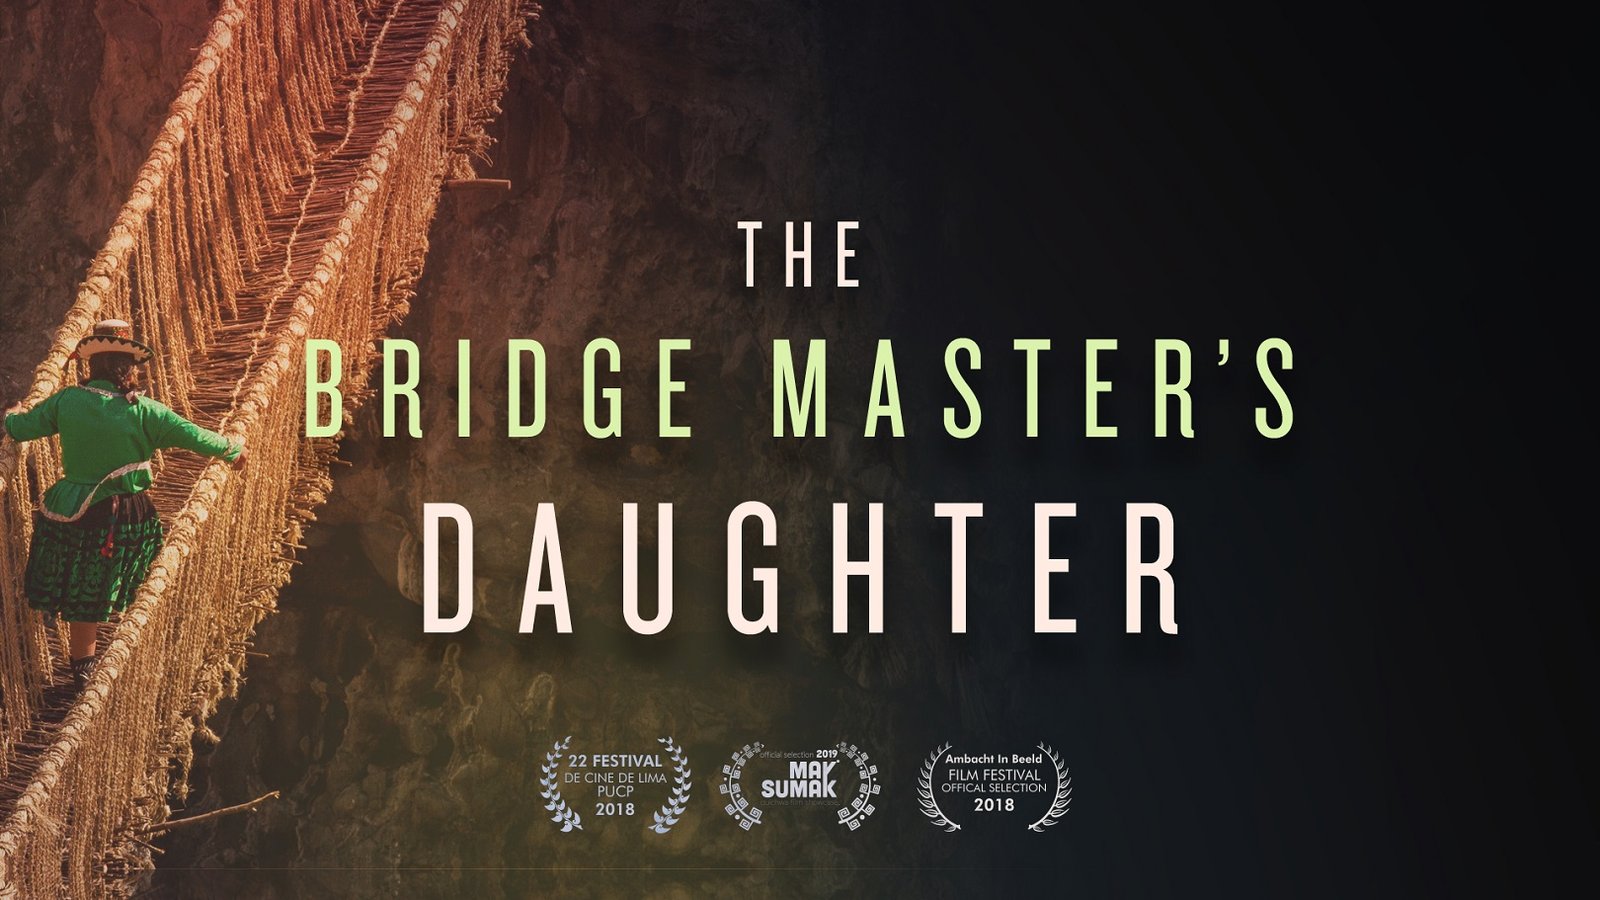 The Bridge Master's Daughter - Cultural Traditions in the Andean Highlands of Peru